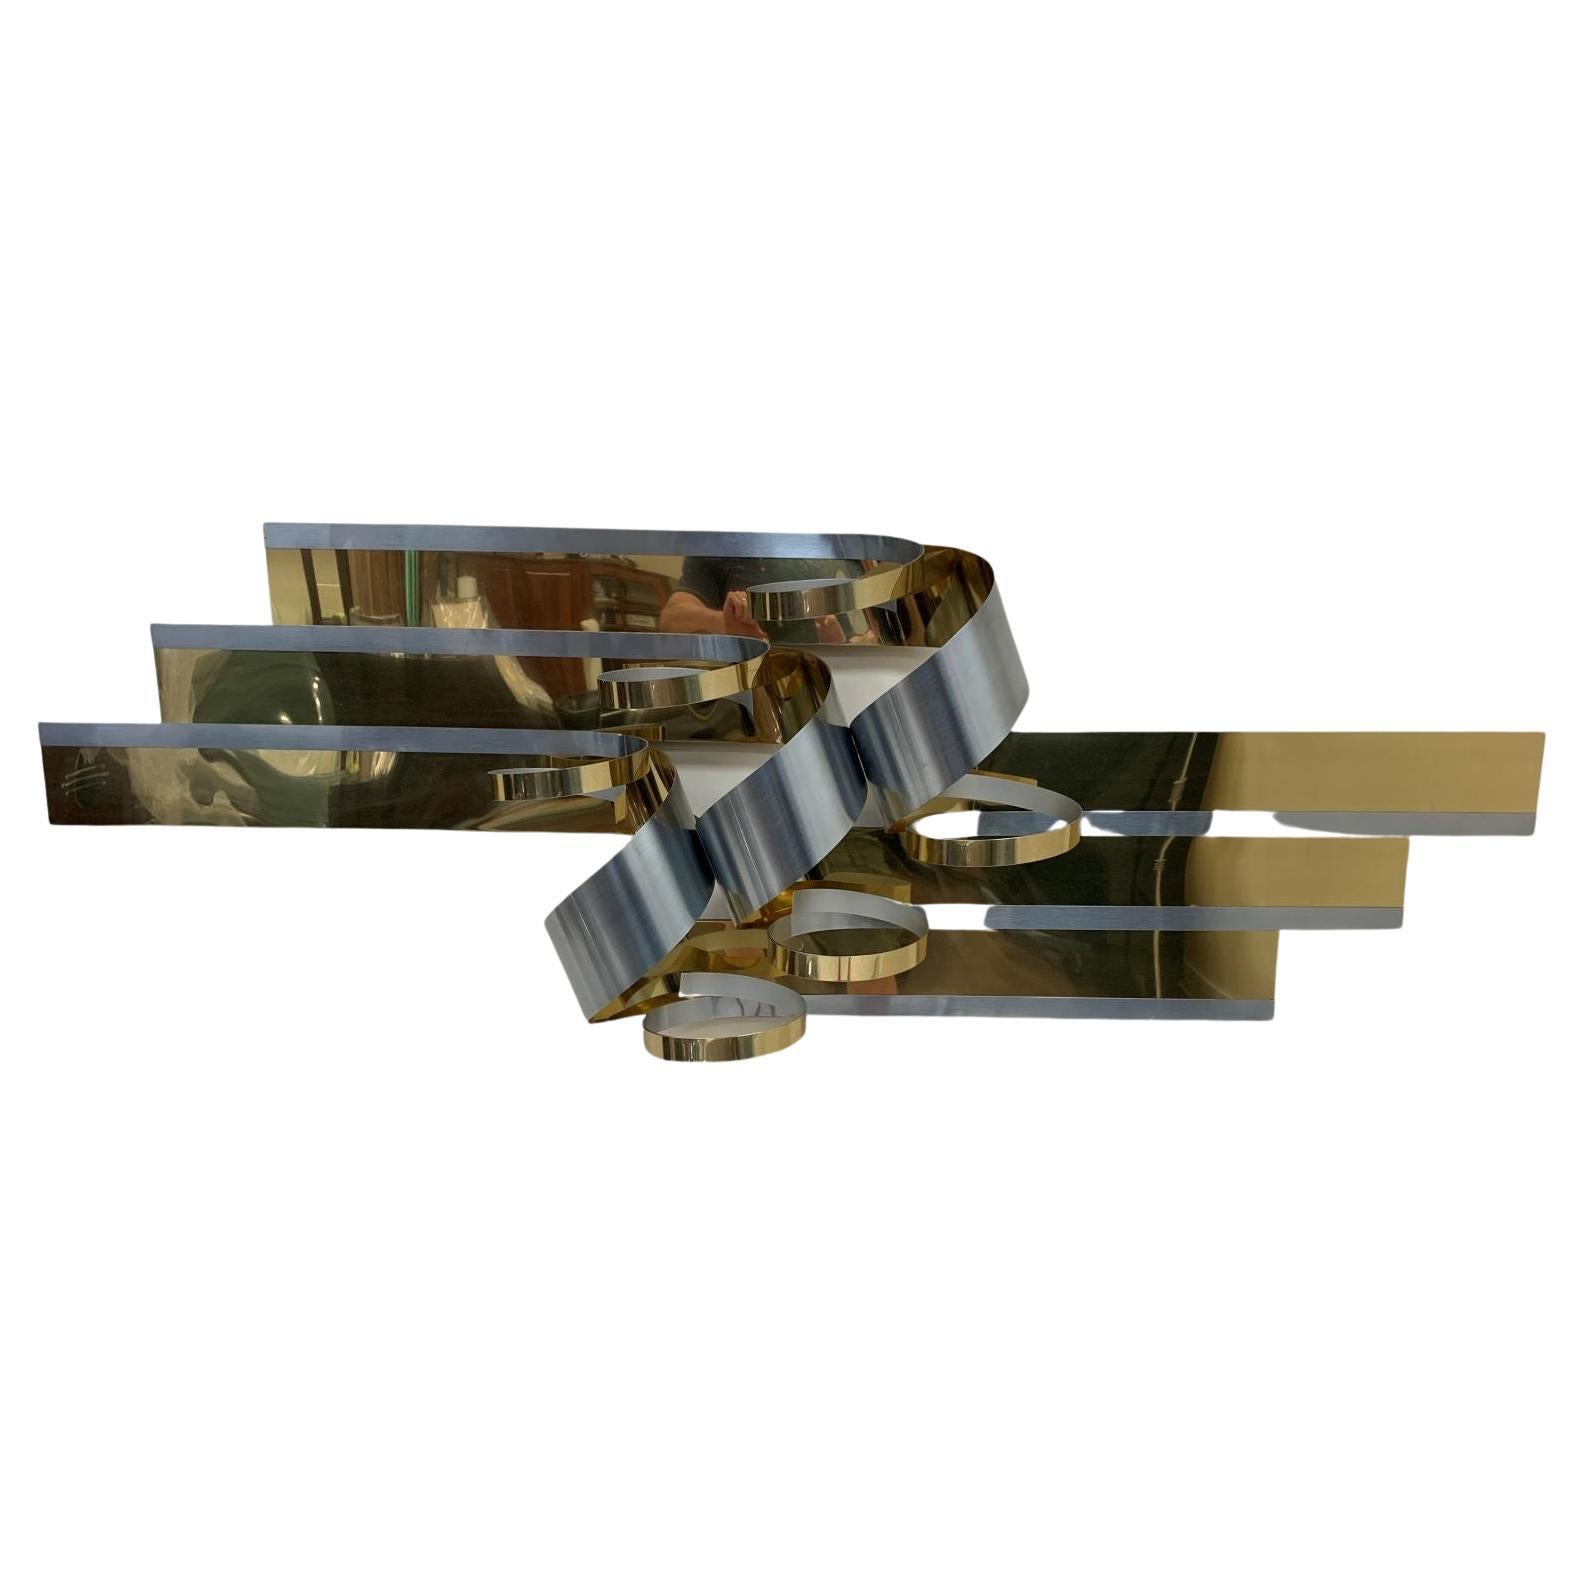 American C. Jere Large Ribbon Brass and Steel Art Wall Sculpture C.1989 For Sale